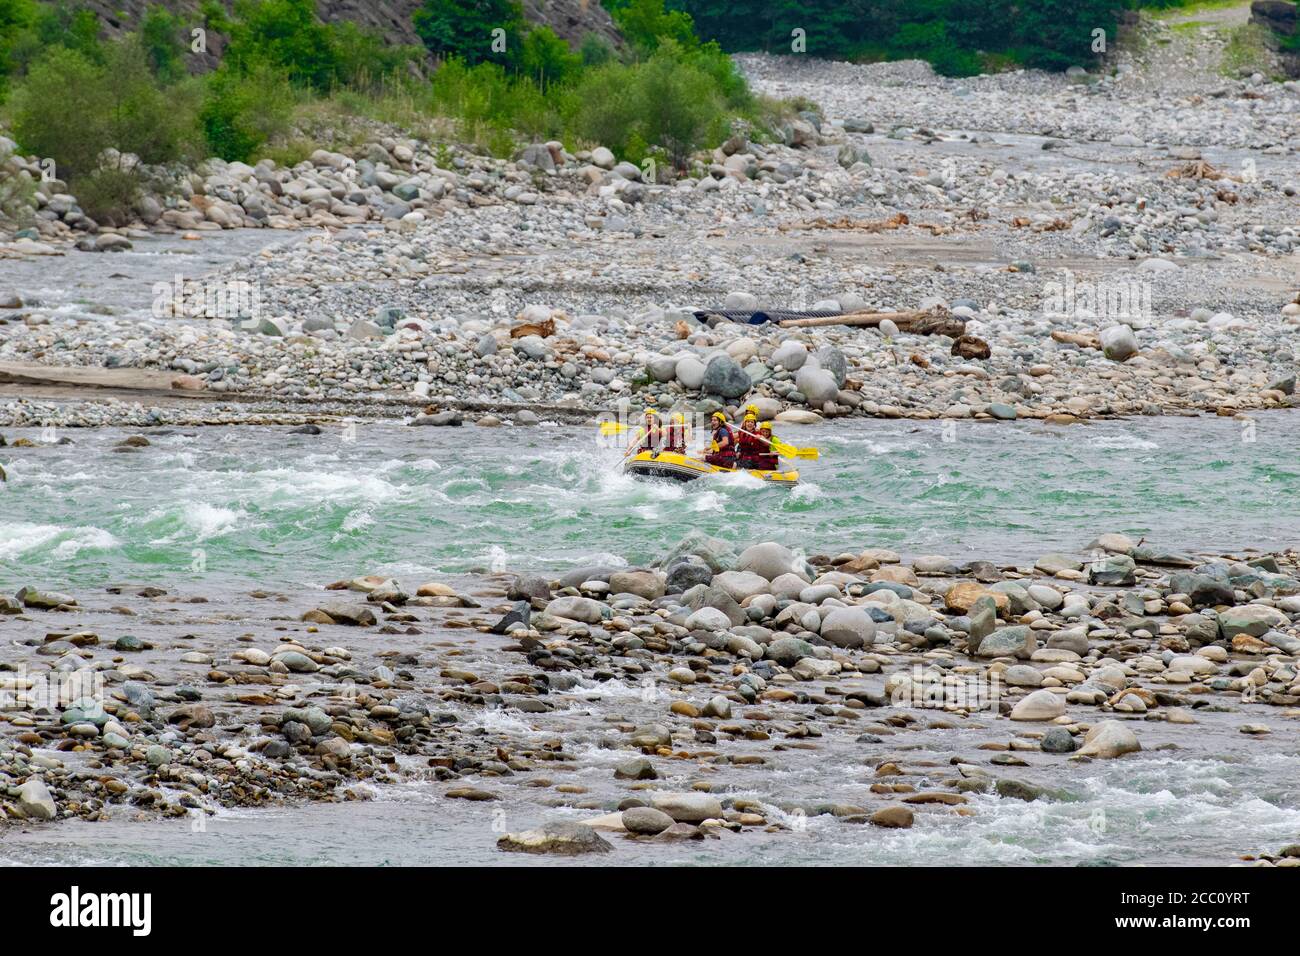 Rize, TURKEY - 2016: Rafting on a mountain river. Waves with spray and foam crashing on the side of the boat, and people rowing oars. Extrem sport. Stock Photo